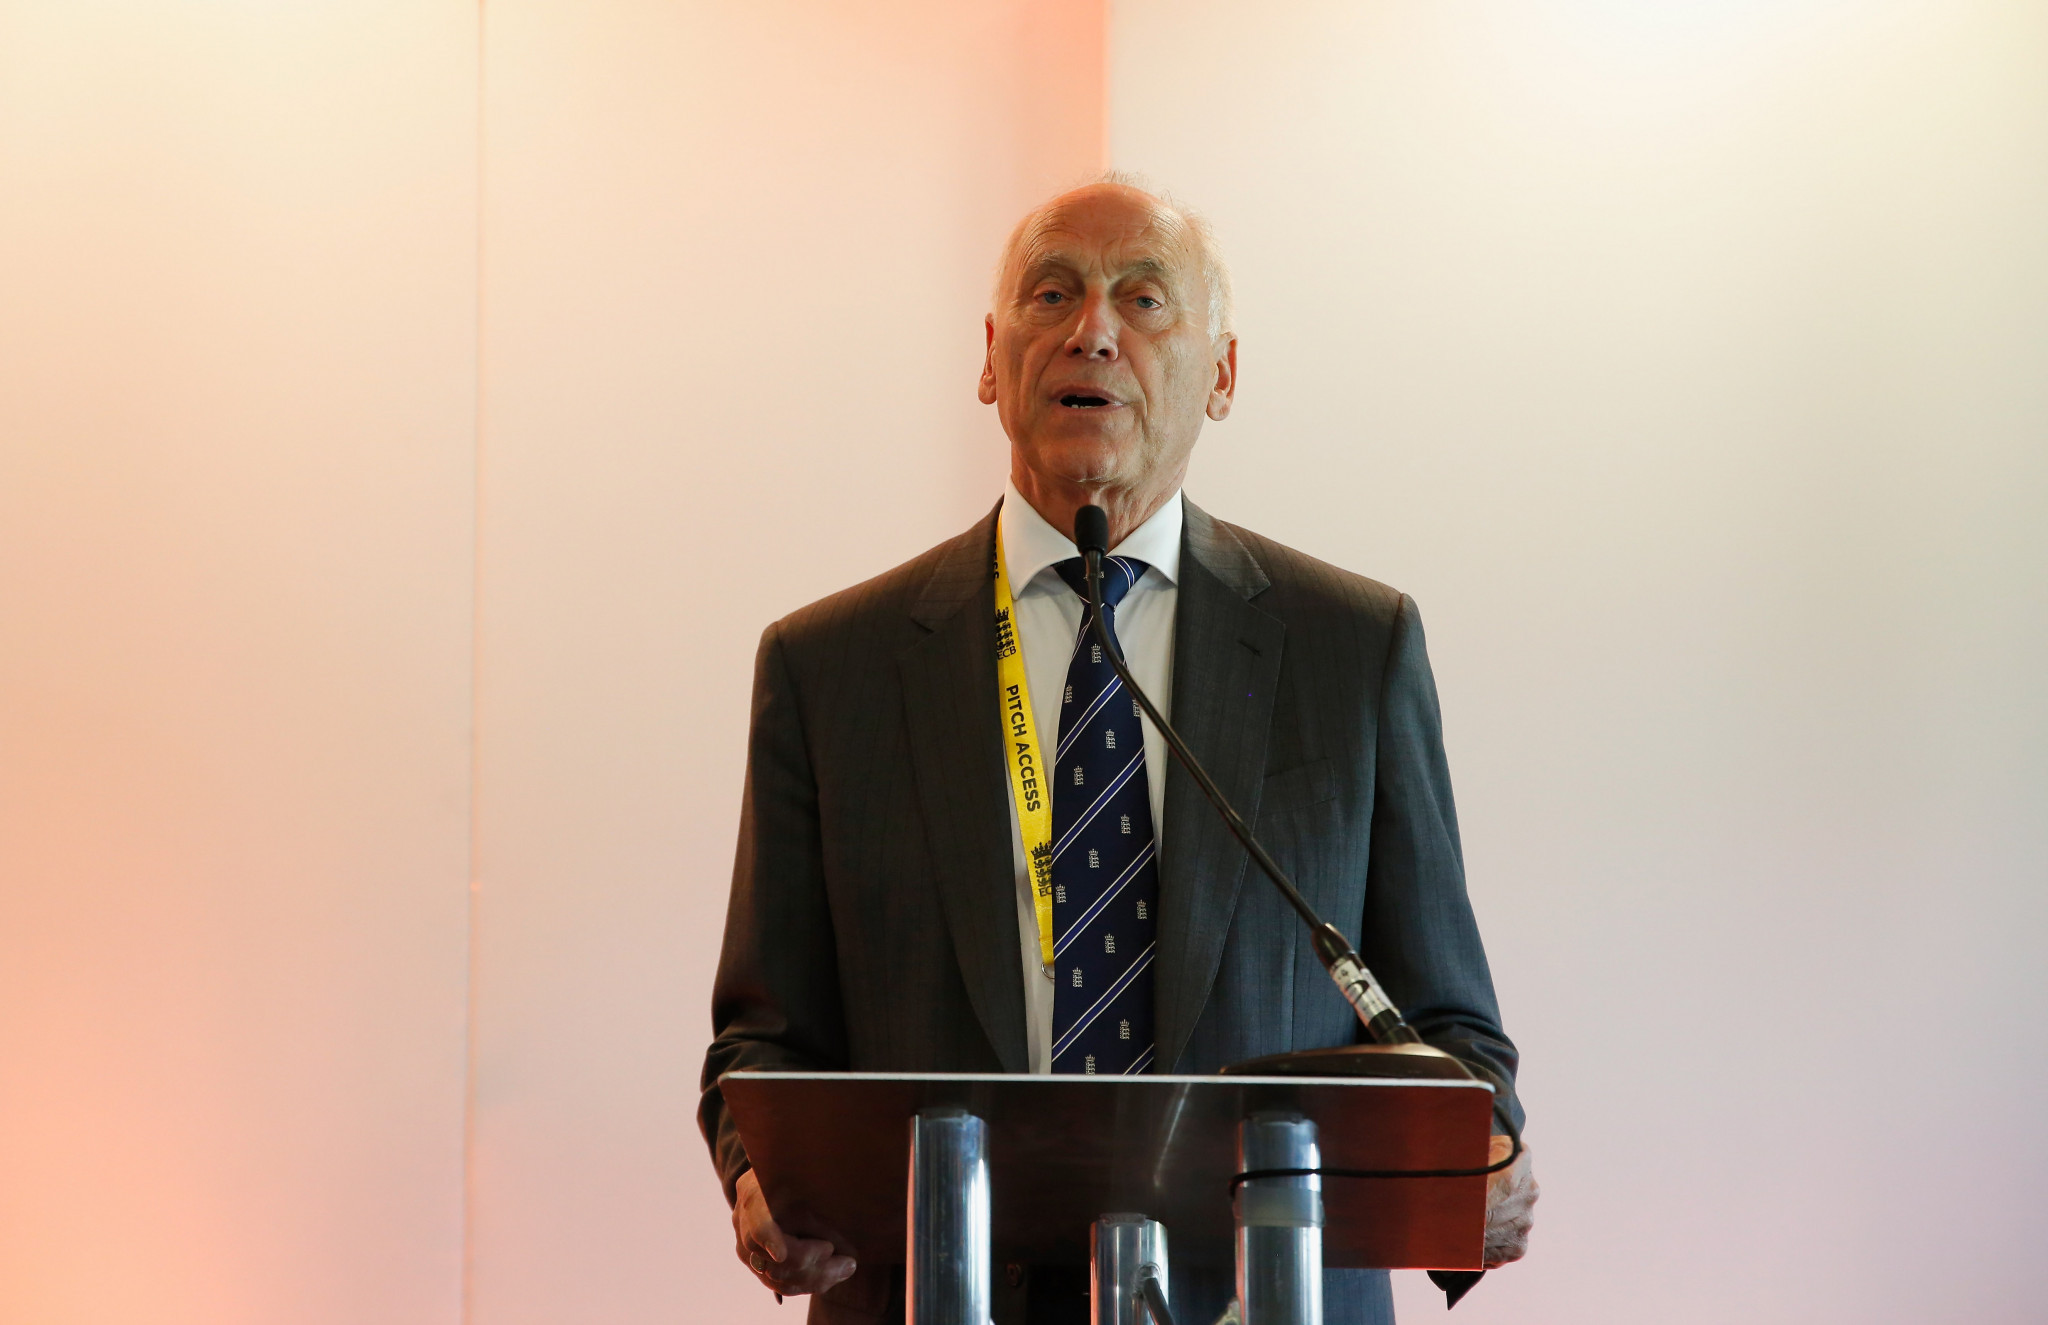 Colin Graves is standing down as chairman of the England and Wales Cricket Board at the end of May following the postponement of the new Hundred competition by 12 months ©Getty Images